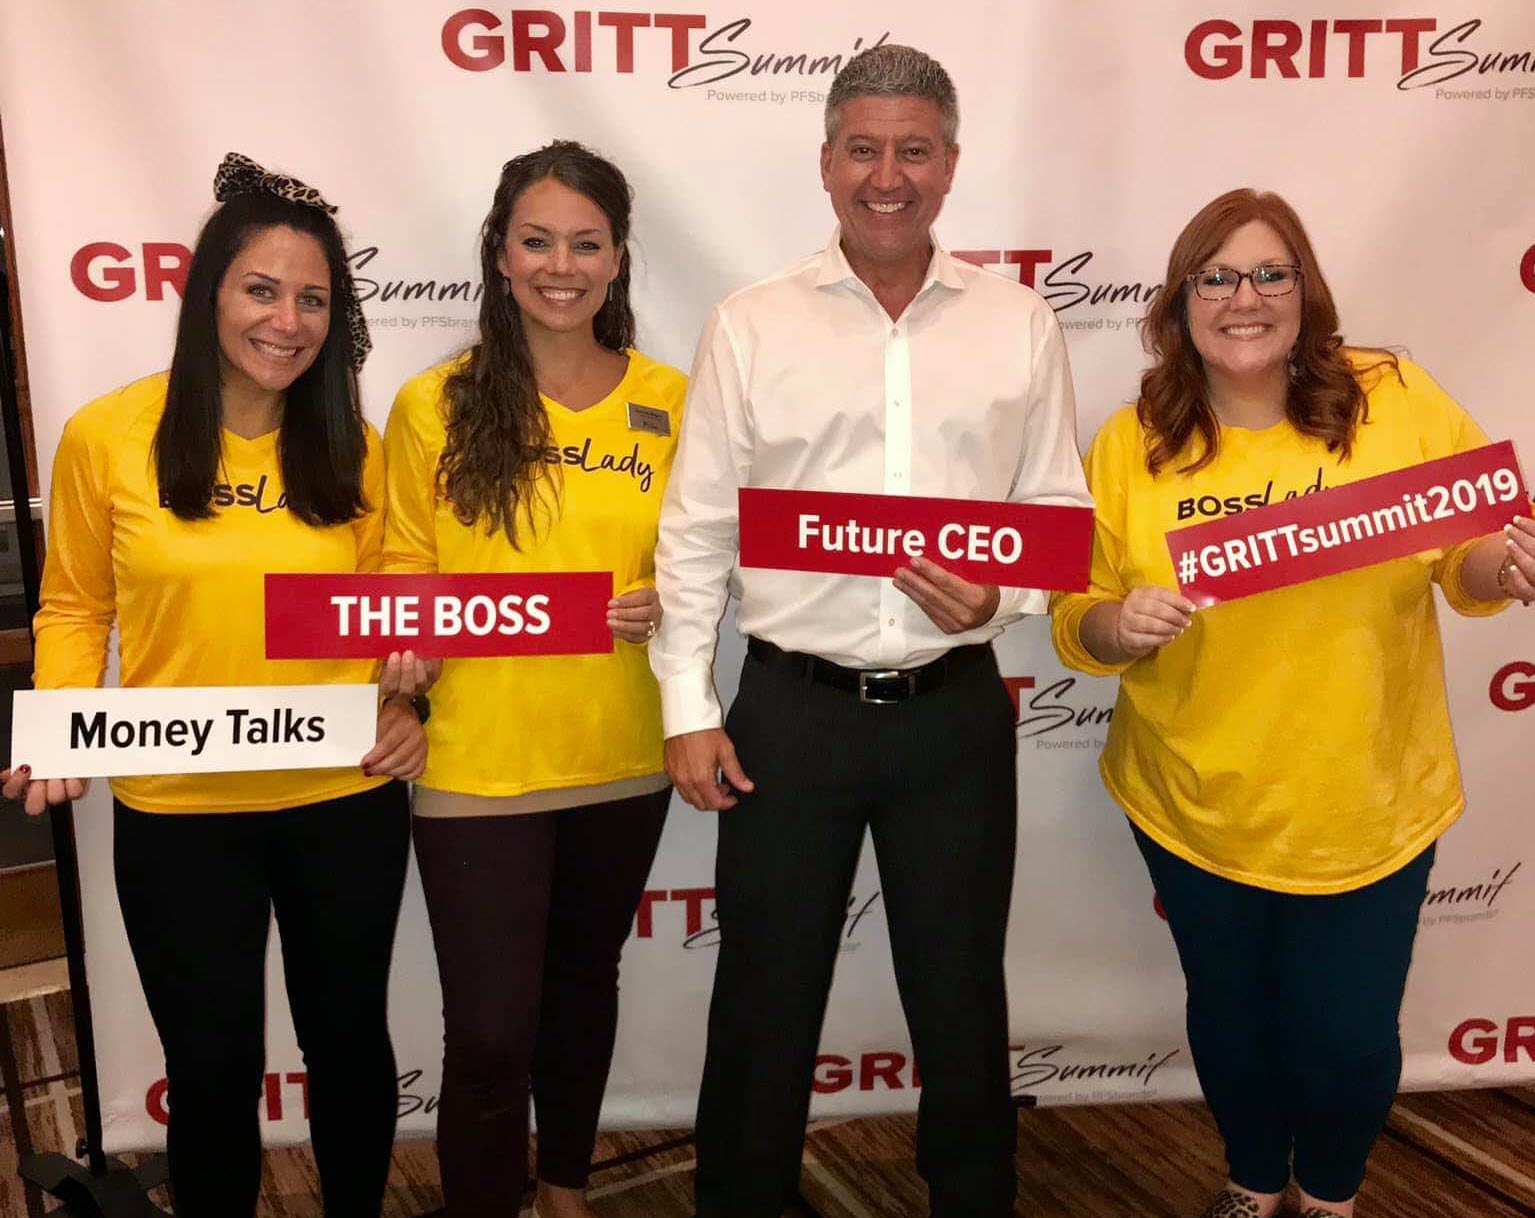 GRITT Summit 2021 Business Conference 3